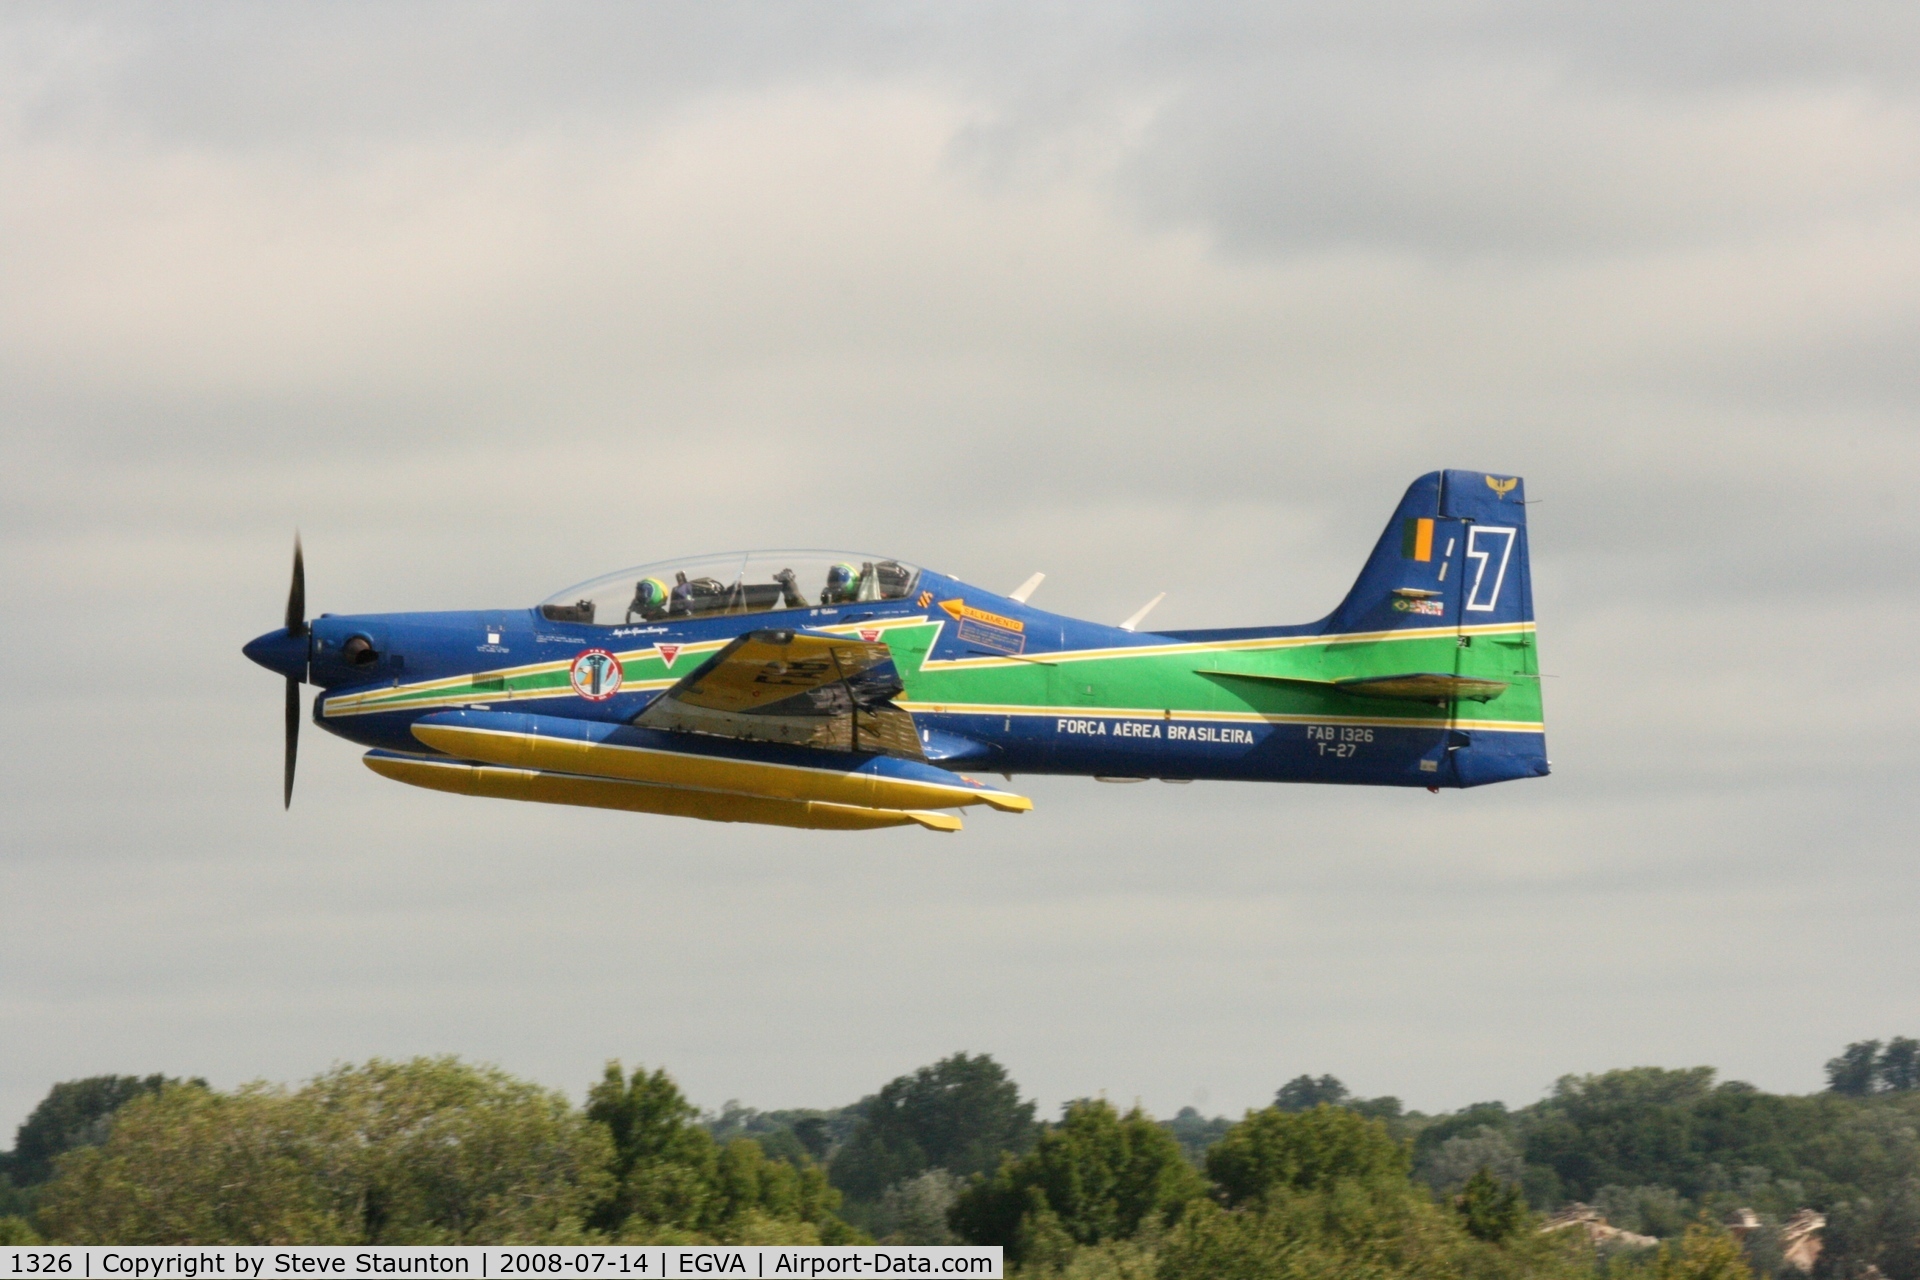 1326, Embraer T-27 Tucano (EMB-312) C/N 312030, Taken at the Royal International Air Tattoo 2008 during arrivals and departures (show days cancelled due to bad weather)